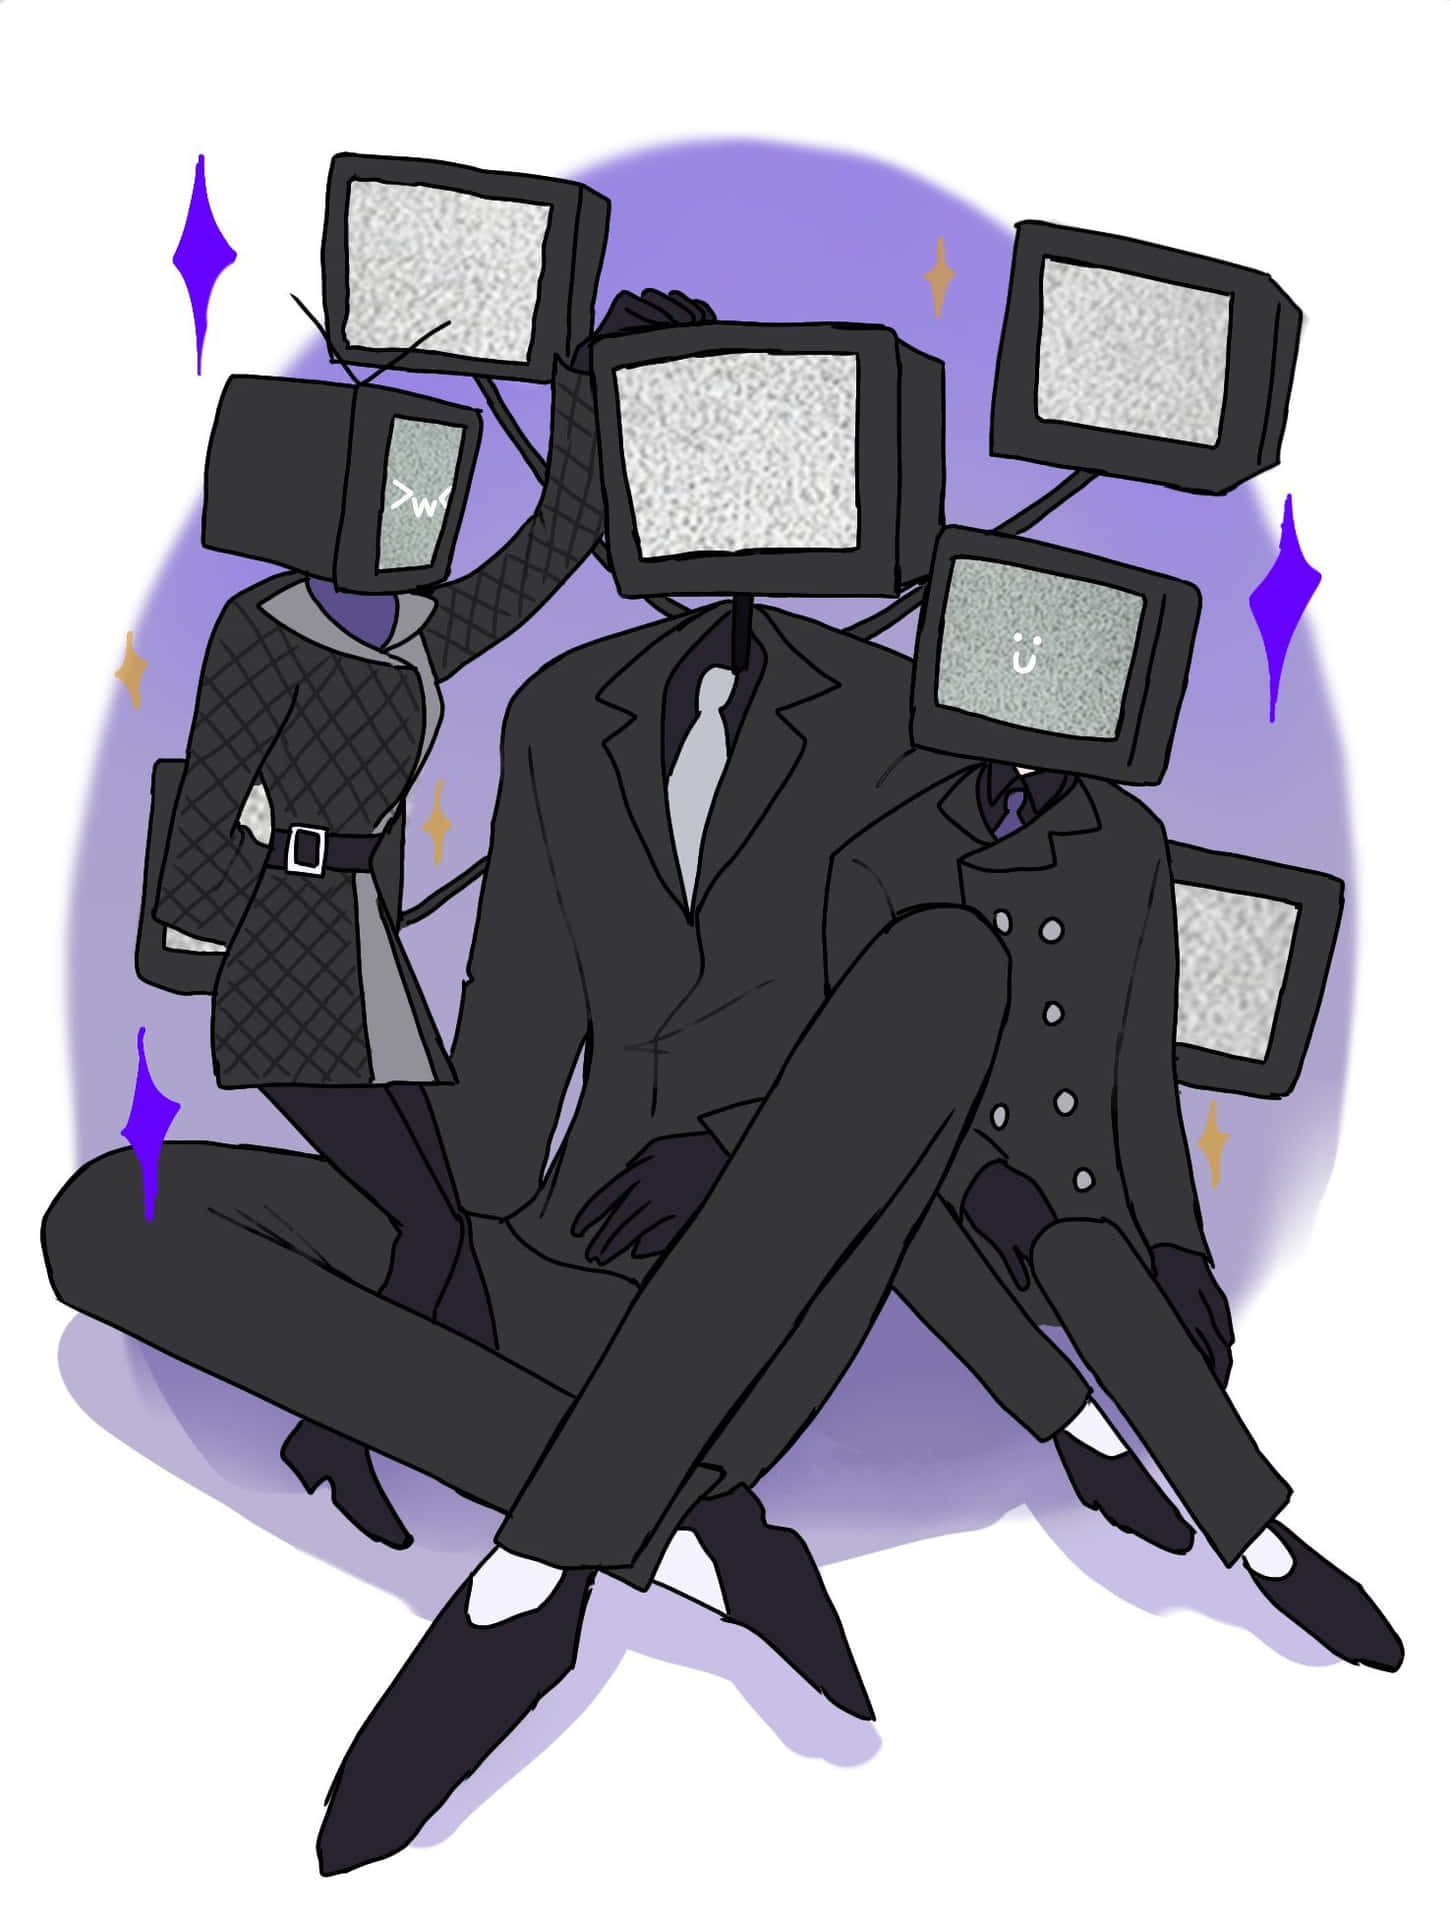 Television Headed Figures In Suits Wallpaper